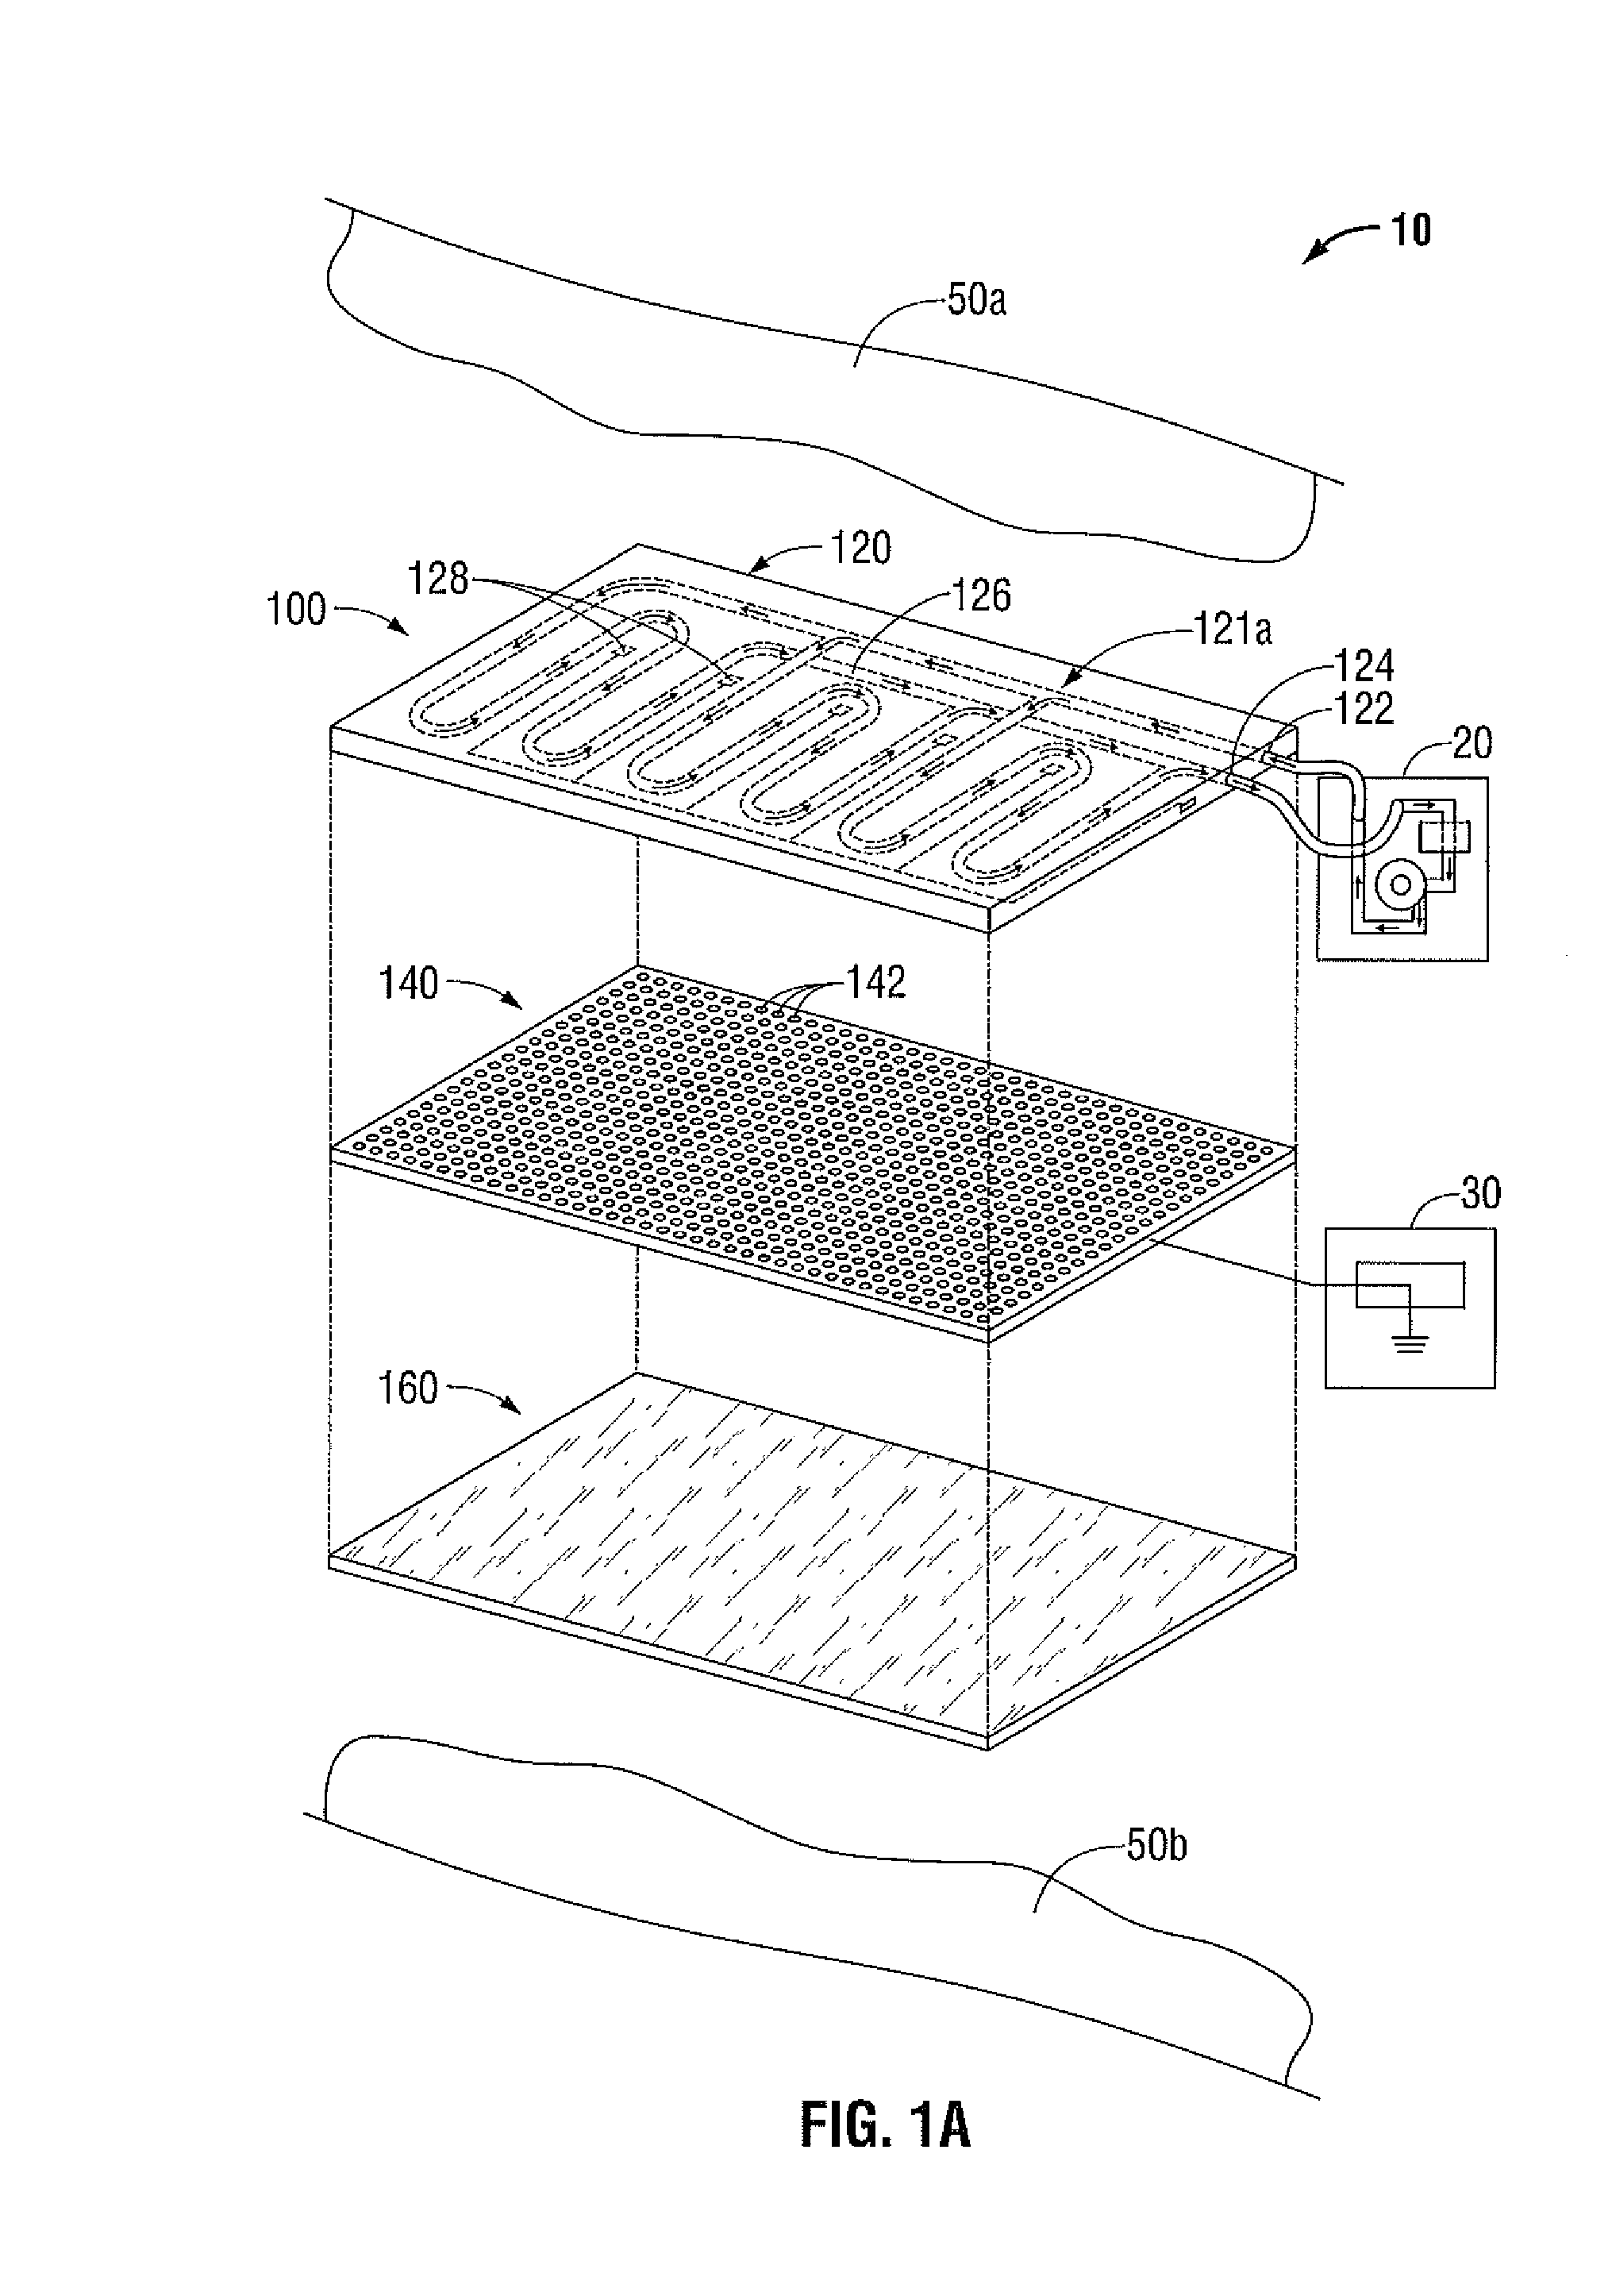 Microwave Ablation Safety Pad, Microwave Safety Pad System and Method of Use